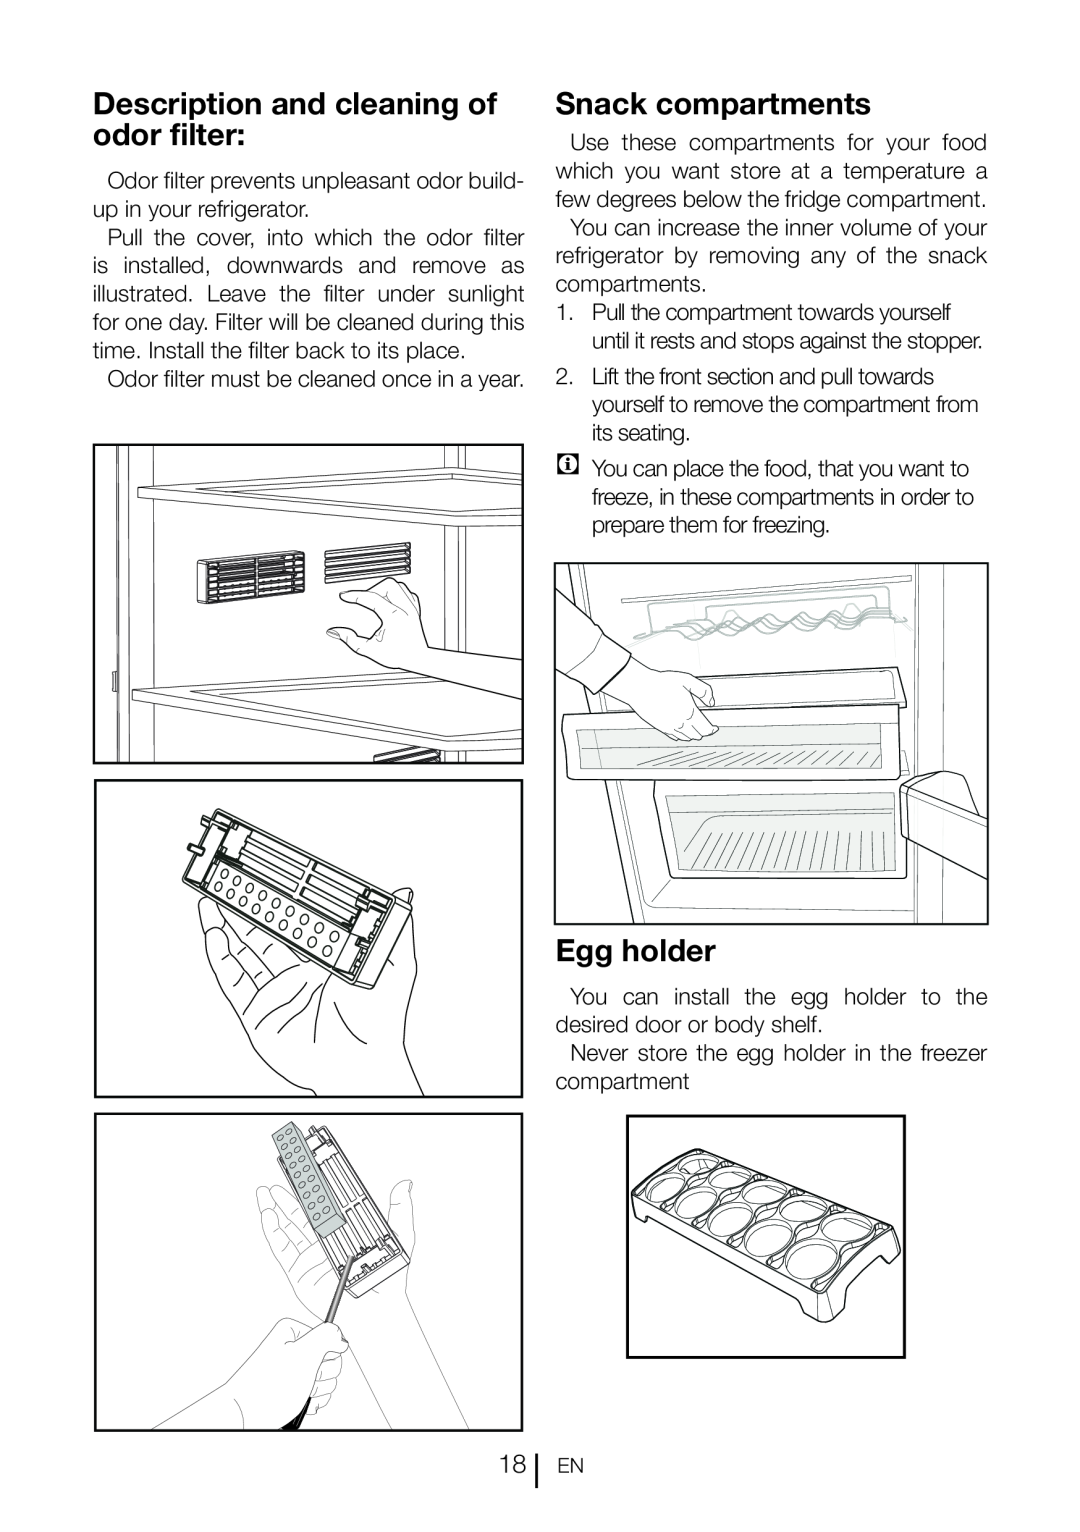 Beko DN151120X manual Description and cleaning of odor filter, Snack compartments, Egg holder 